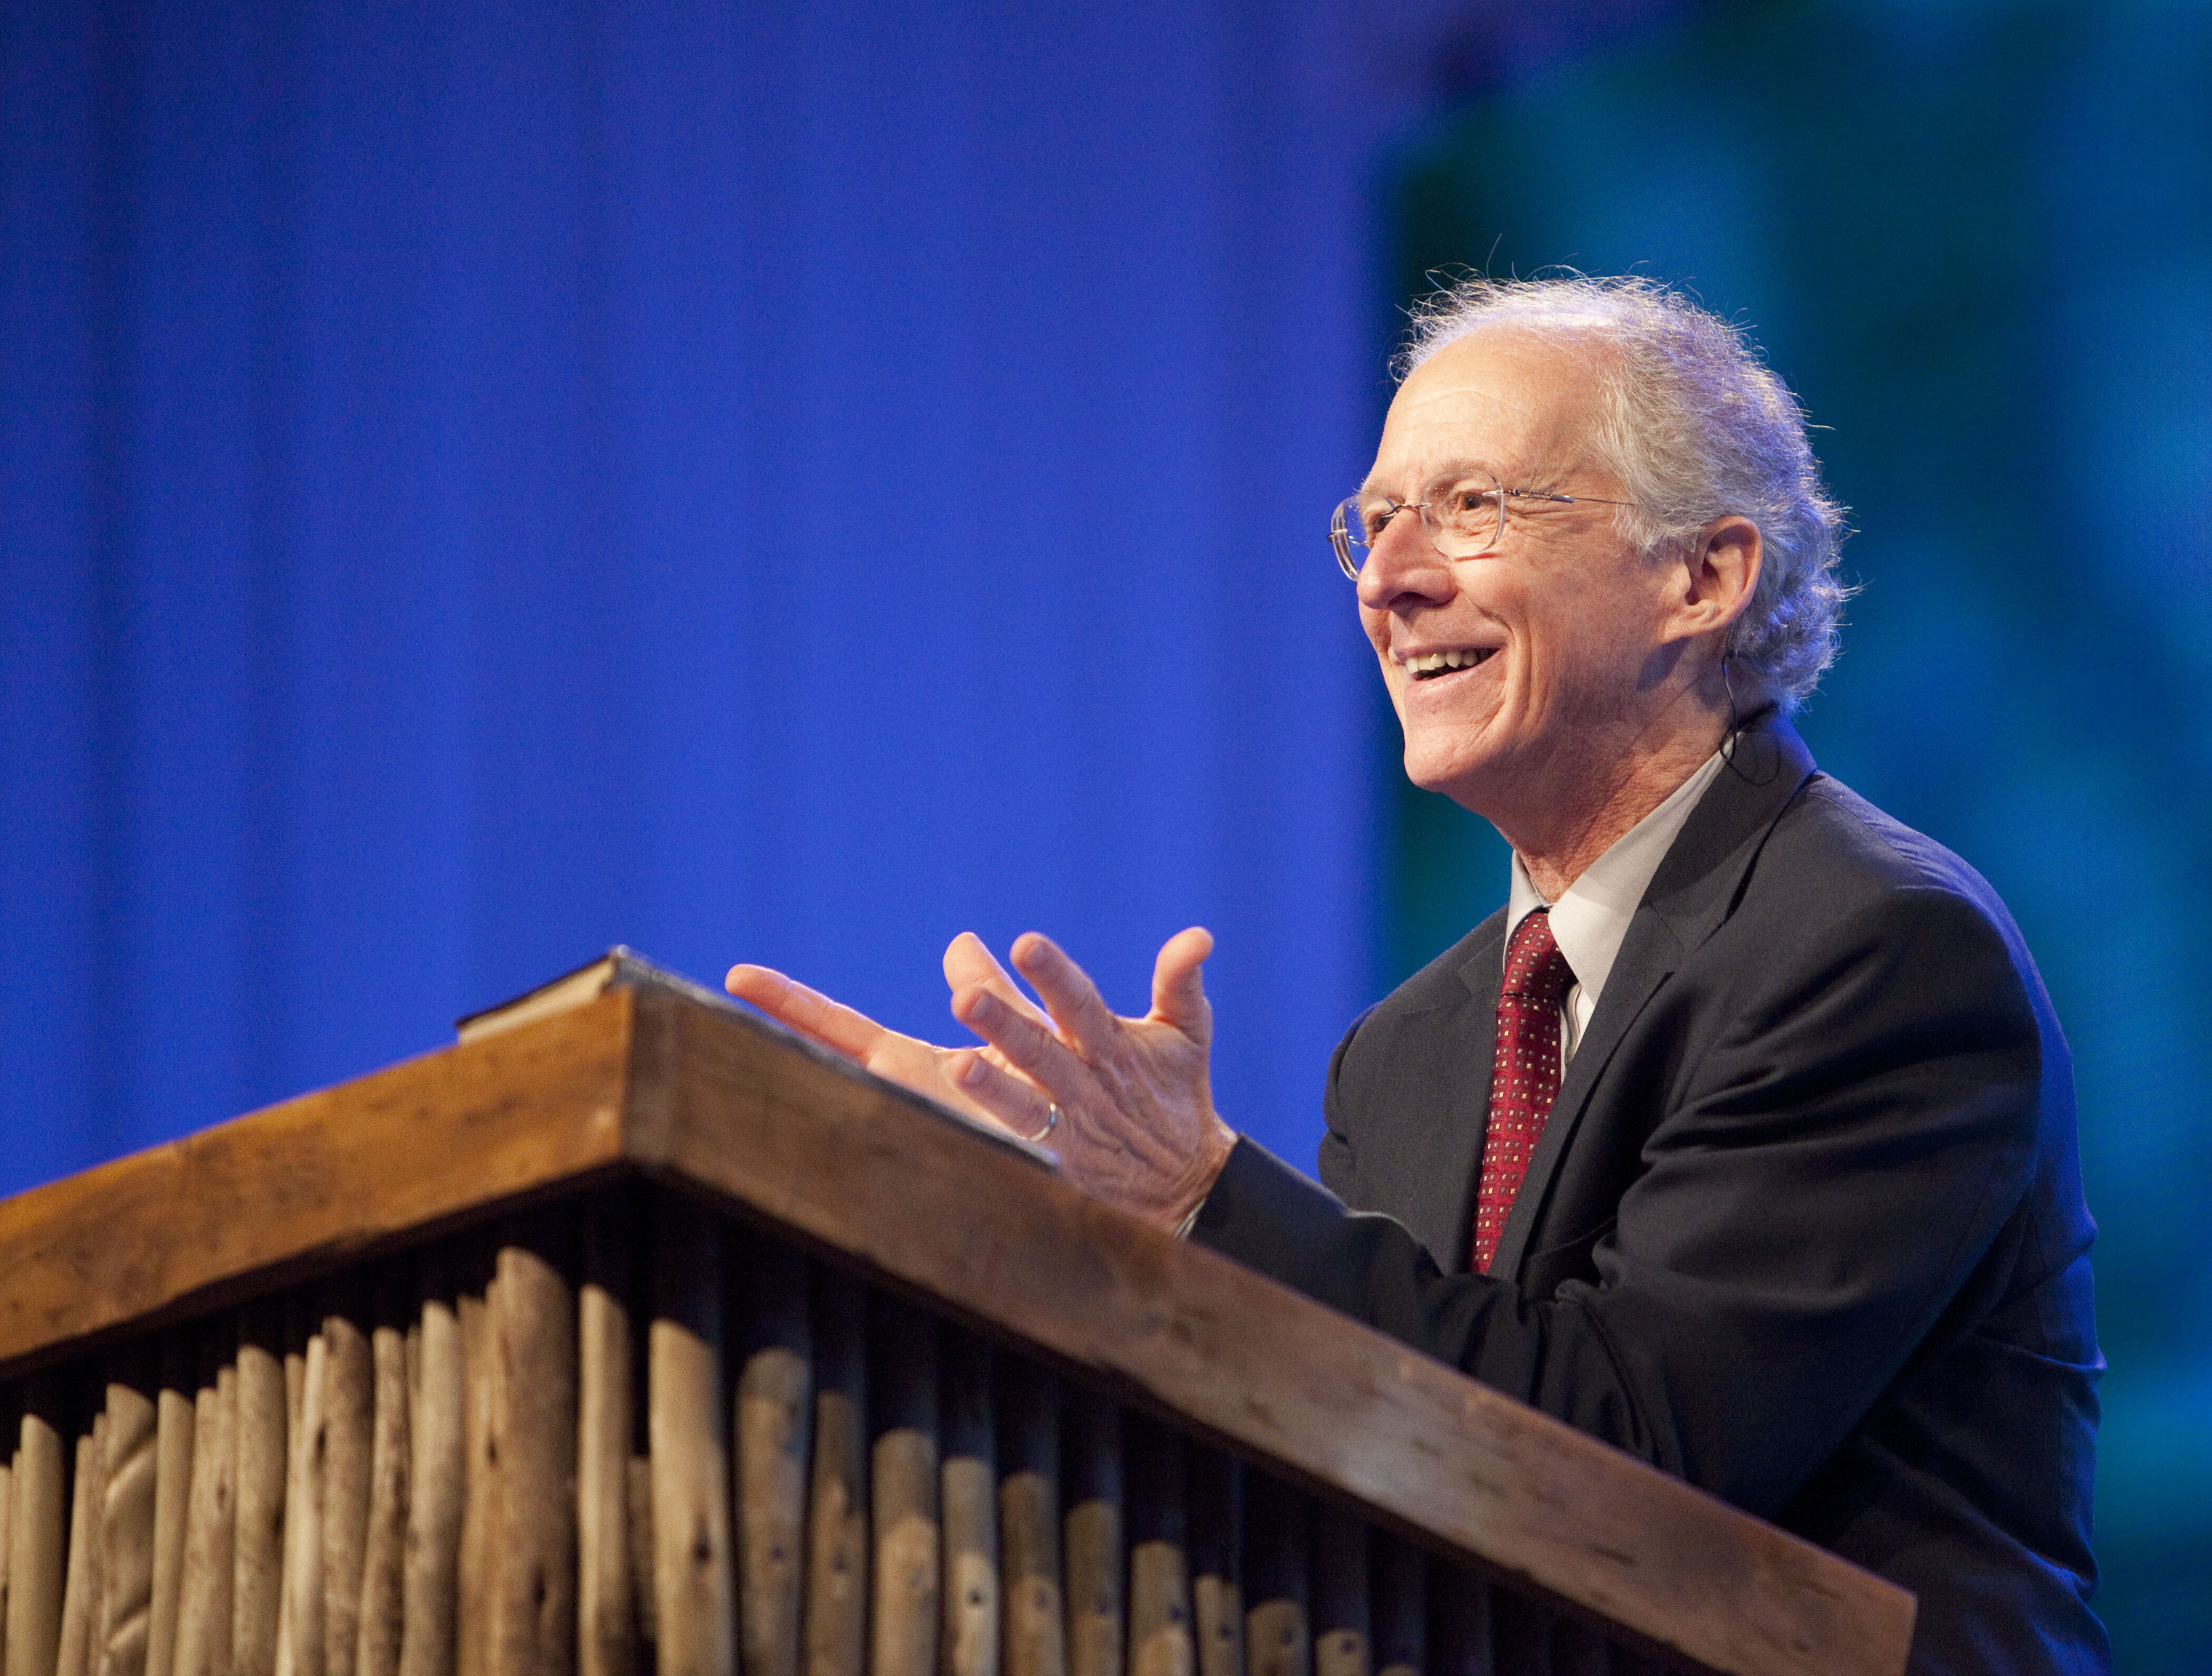 John Piper preaching about the key to escaping porn.